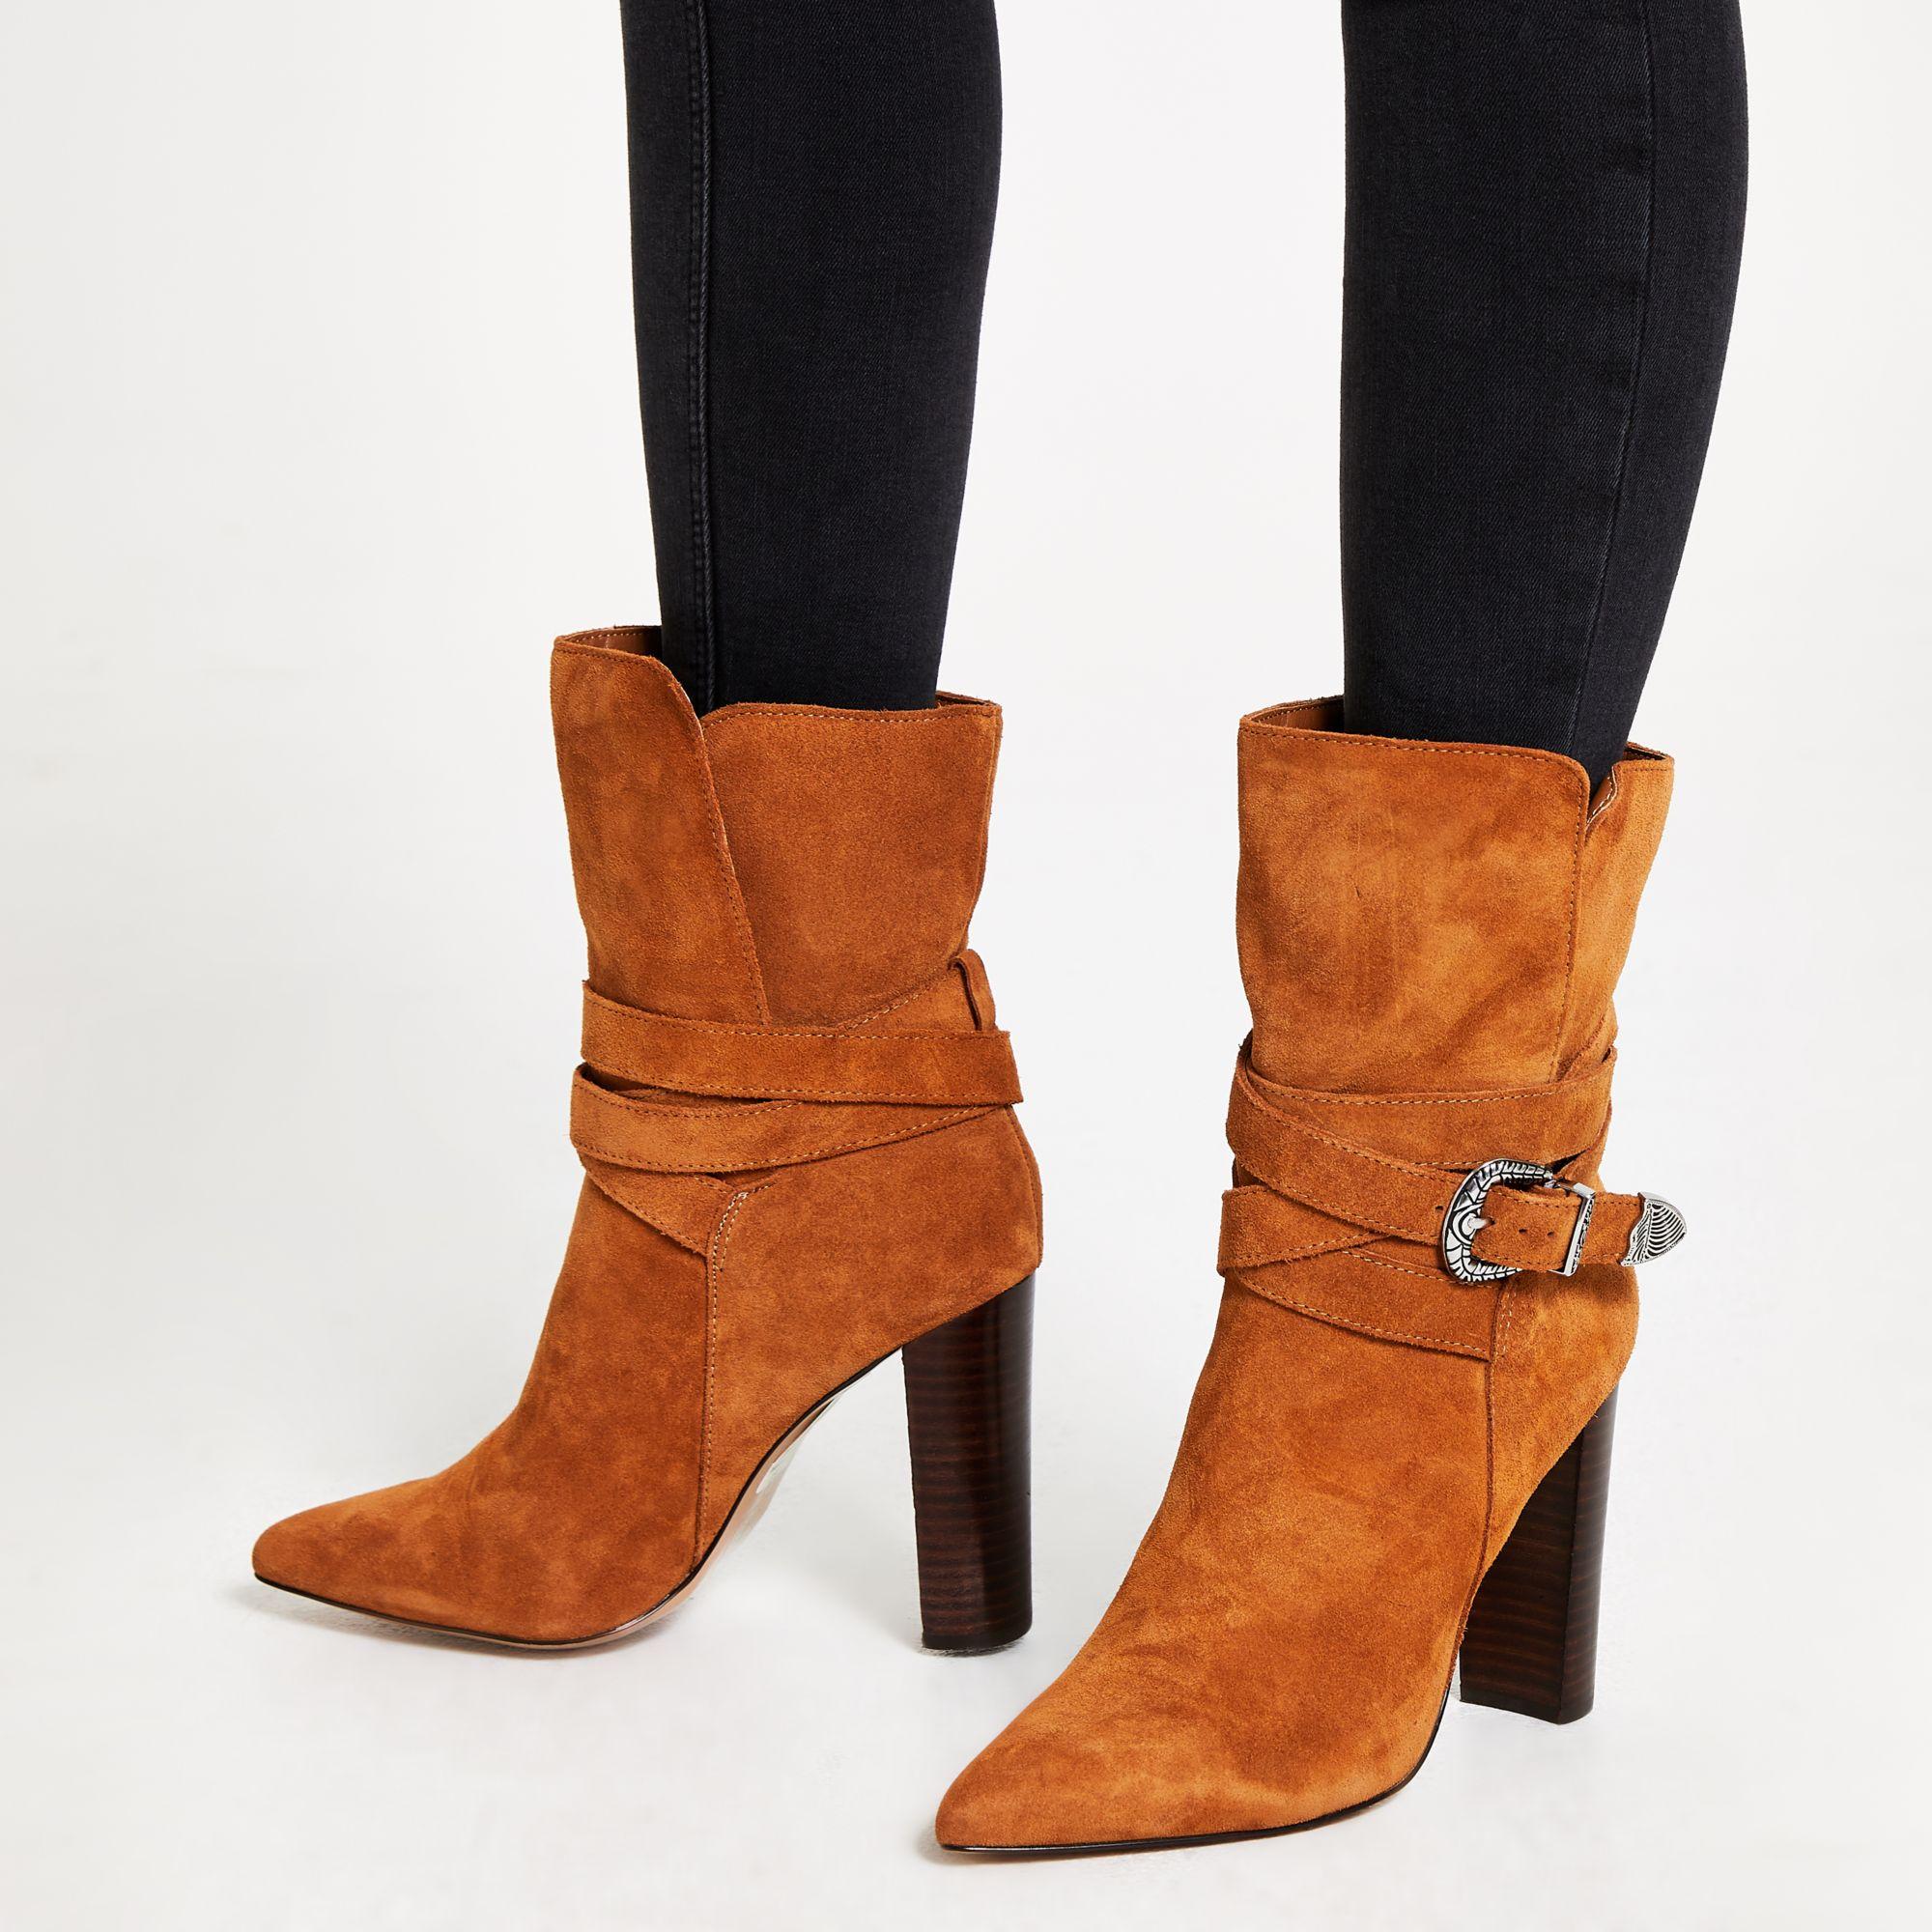 River Island Suede Western Heeled Boots in Brown - Lyst